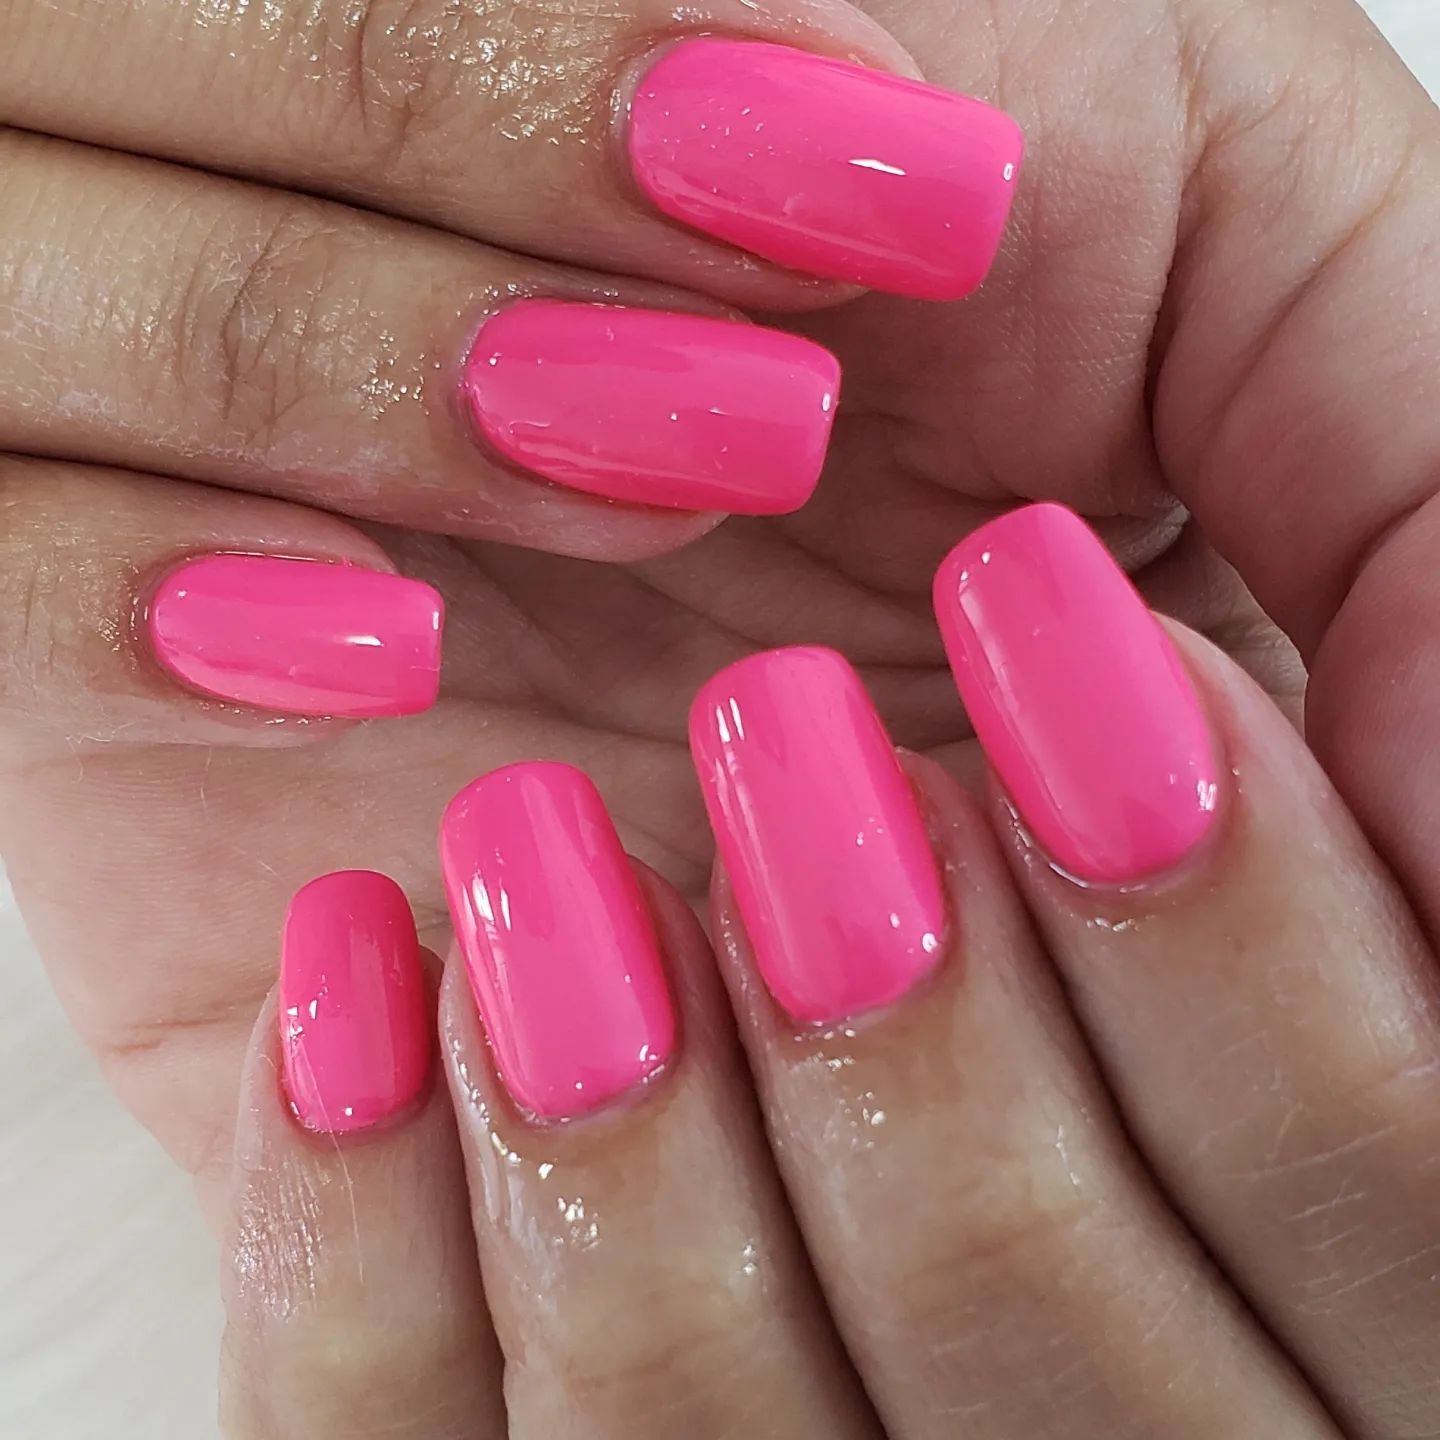 This pink coffin manicure will look amazing on women who want an elegant design for their office or formal moments.